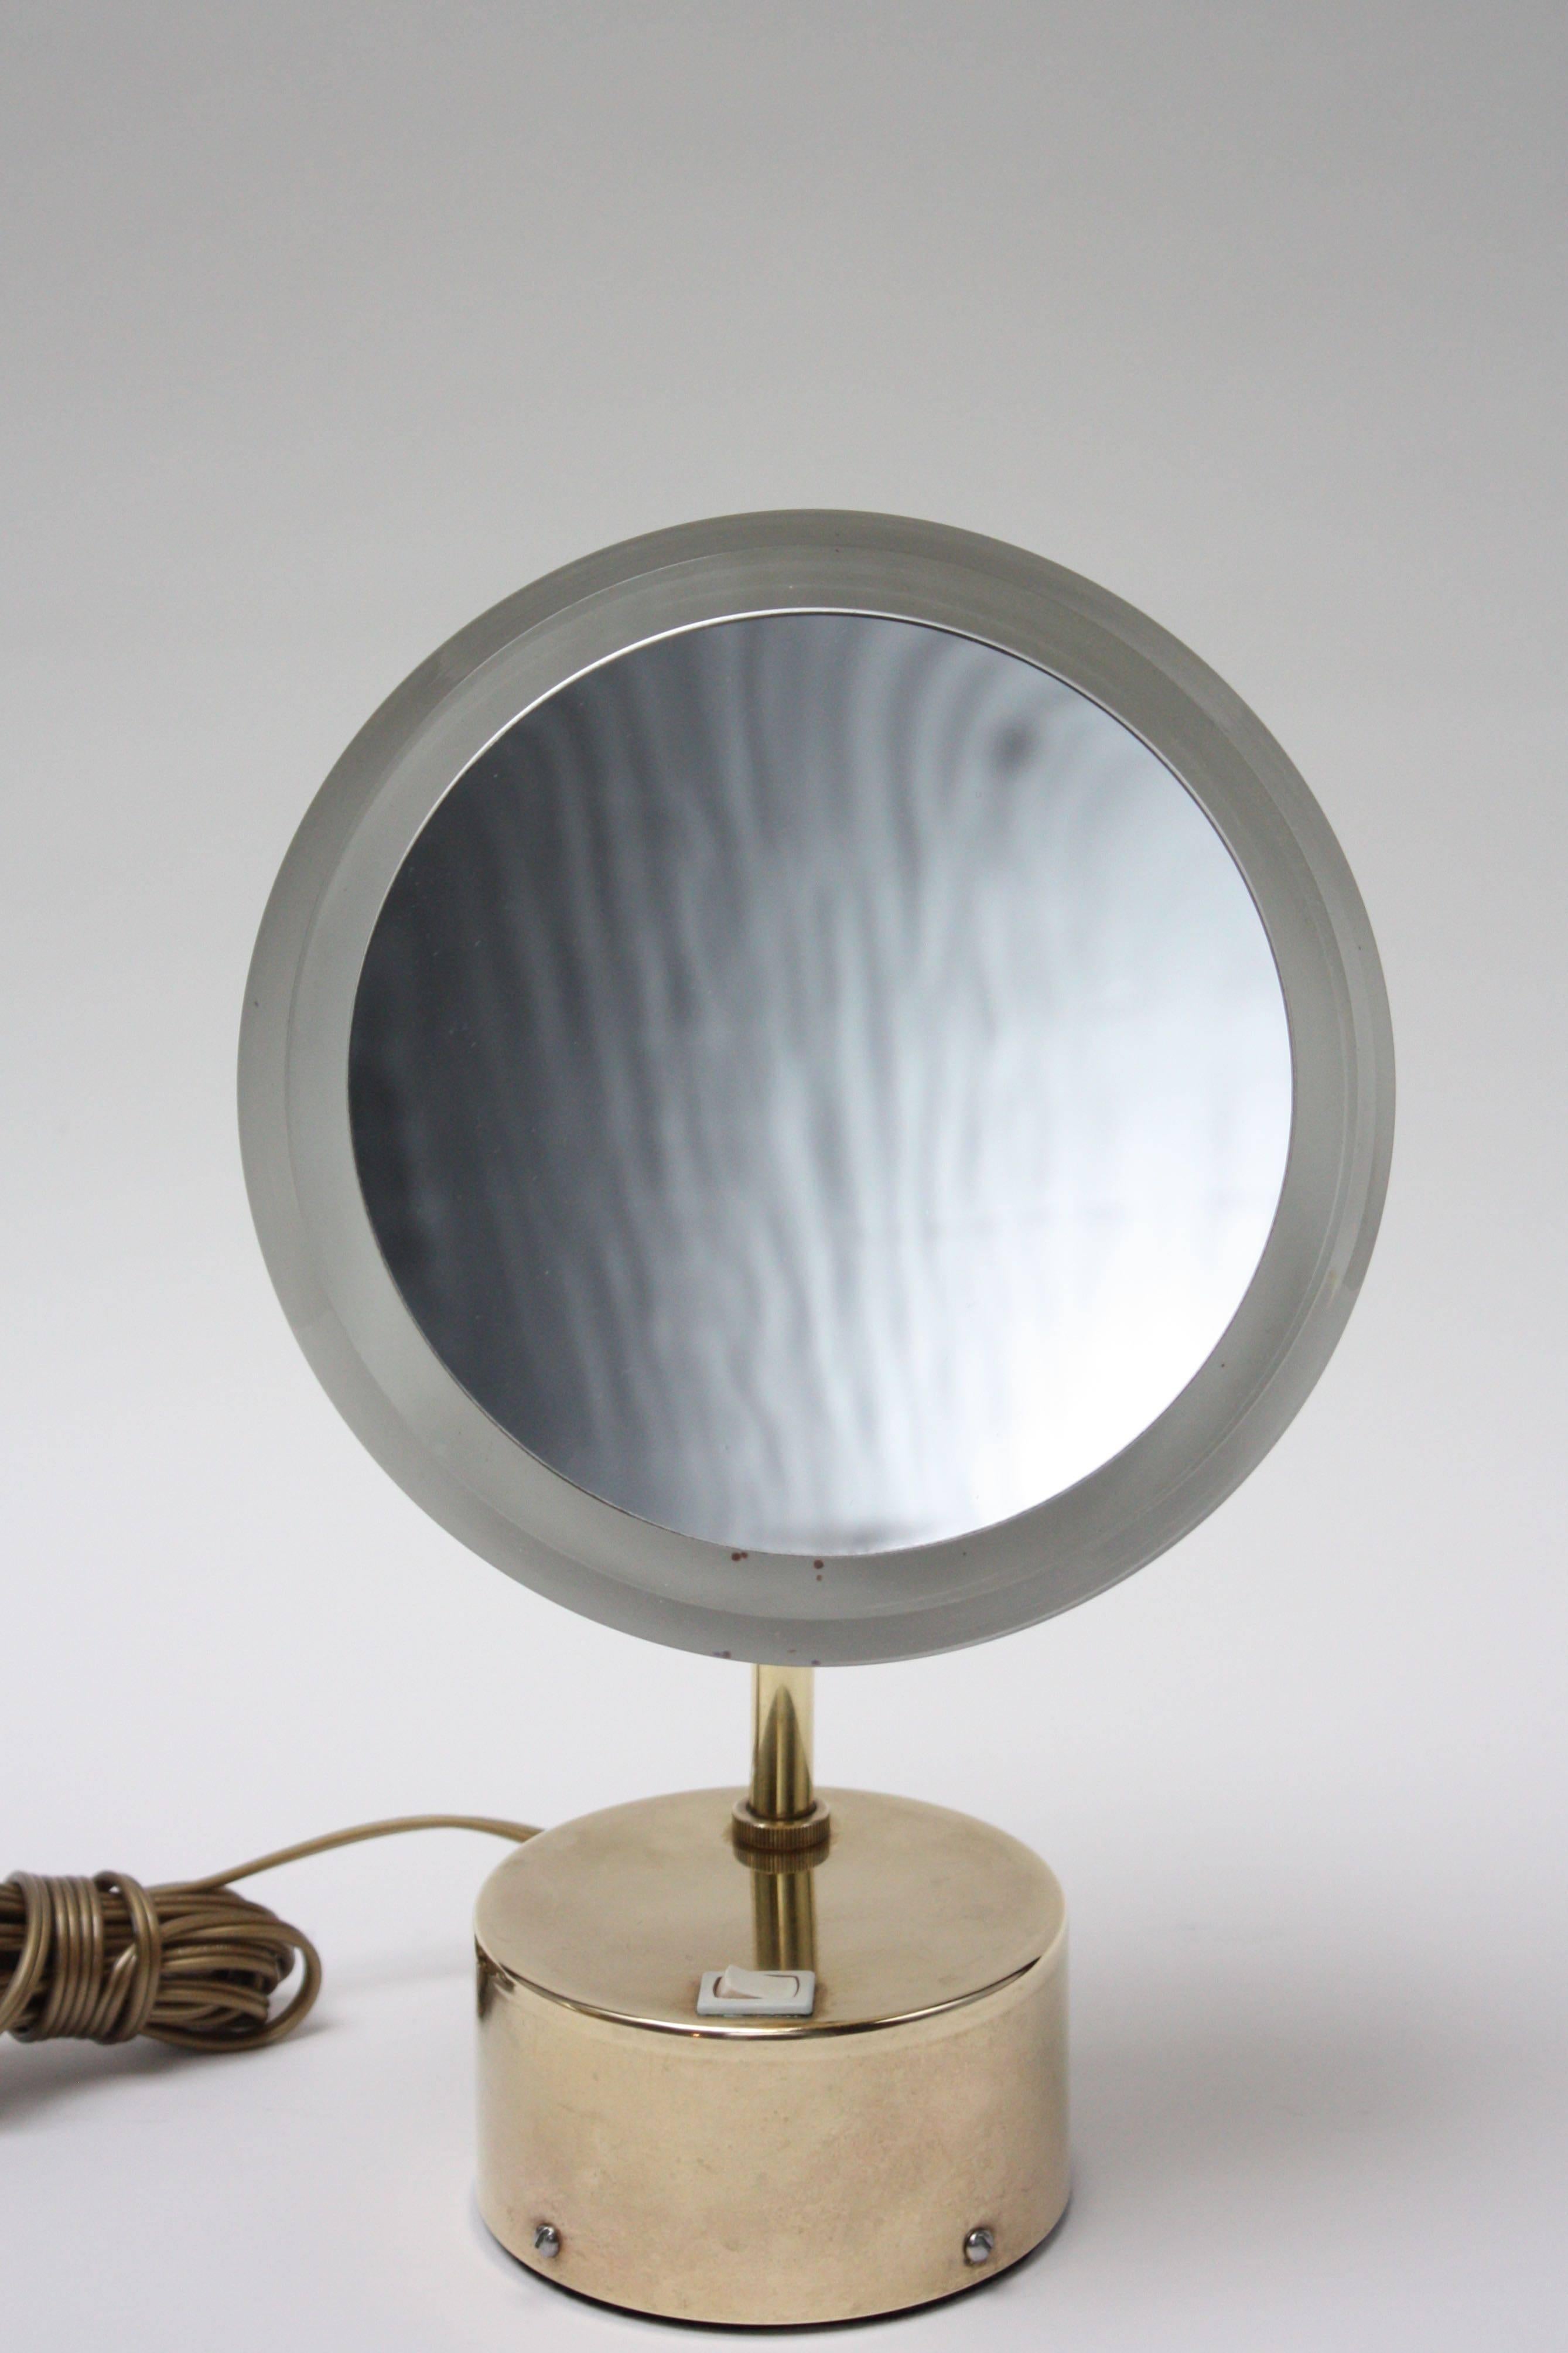 1960s solid brass vanity mirror in excellent, polished condition. The mirror is framed with a band of Lucite; the rest of the lamp is solid brass. The mirror itself can be removed by unscrewing the back mounts to change the lightbulb.